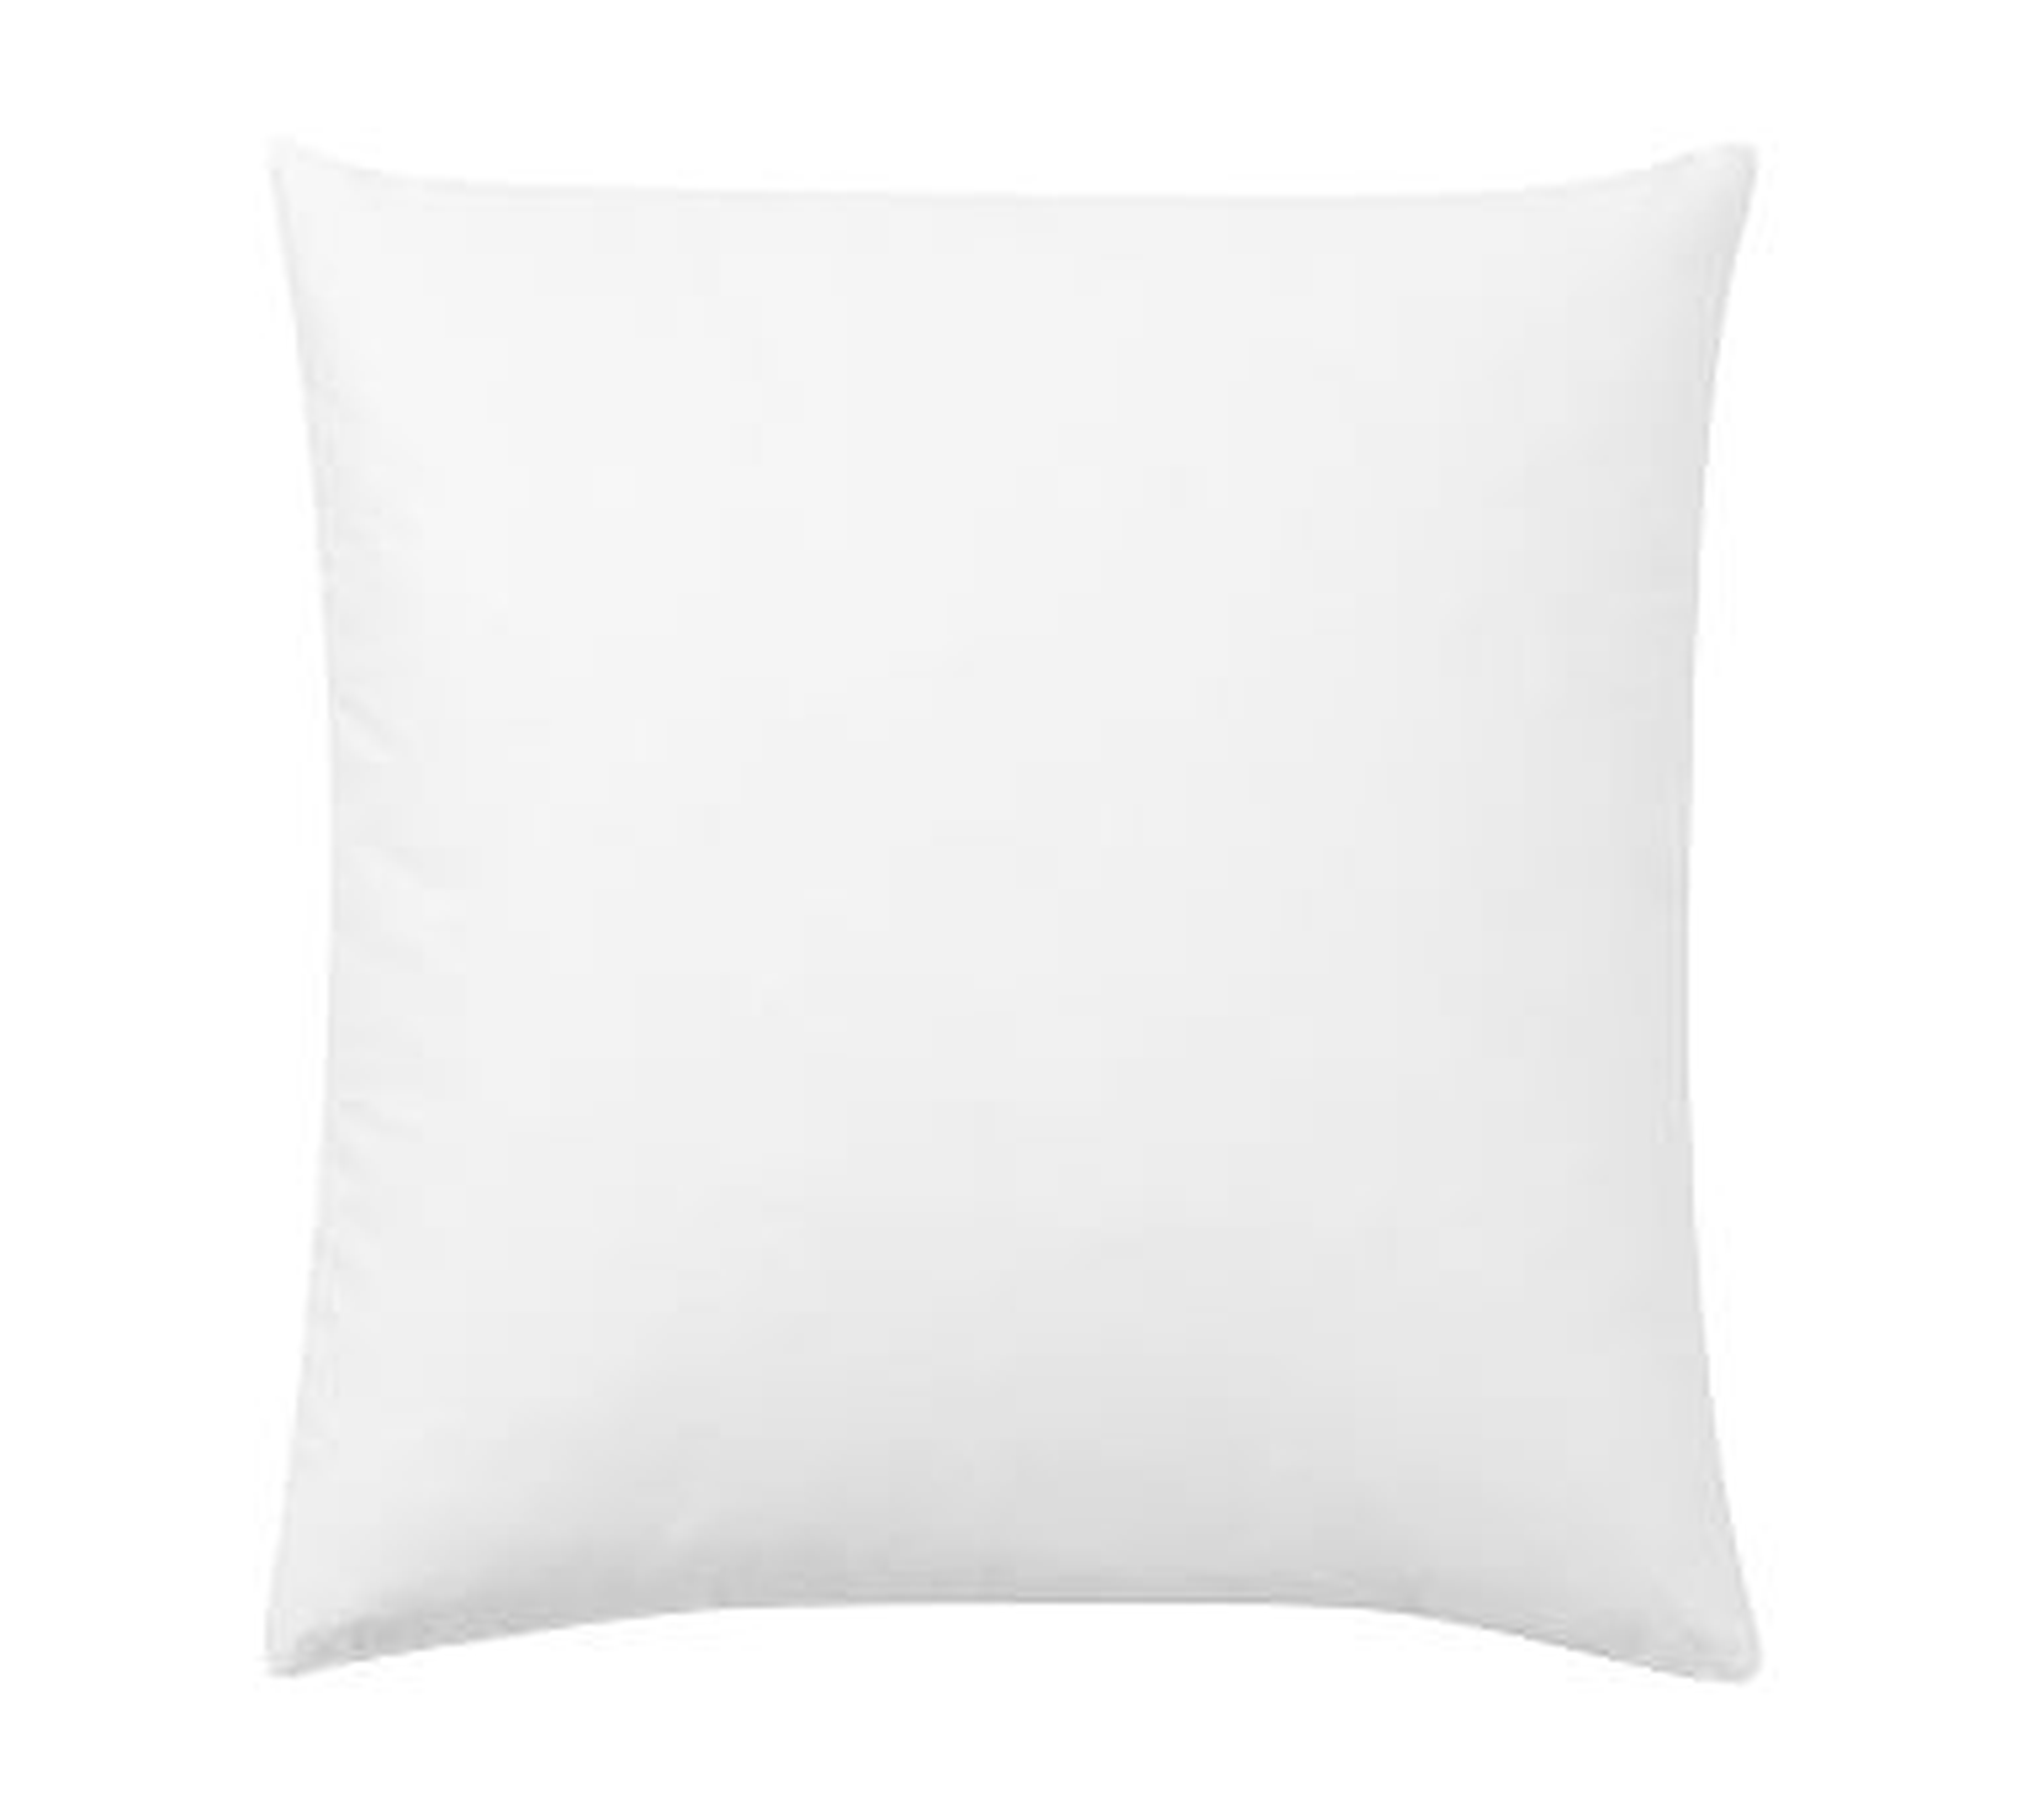 Feather Pillow Insert, 18" sq. - Pottery Barn